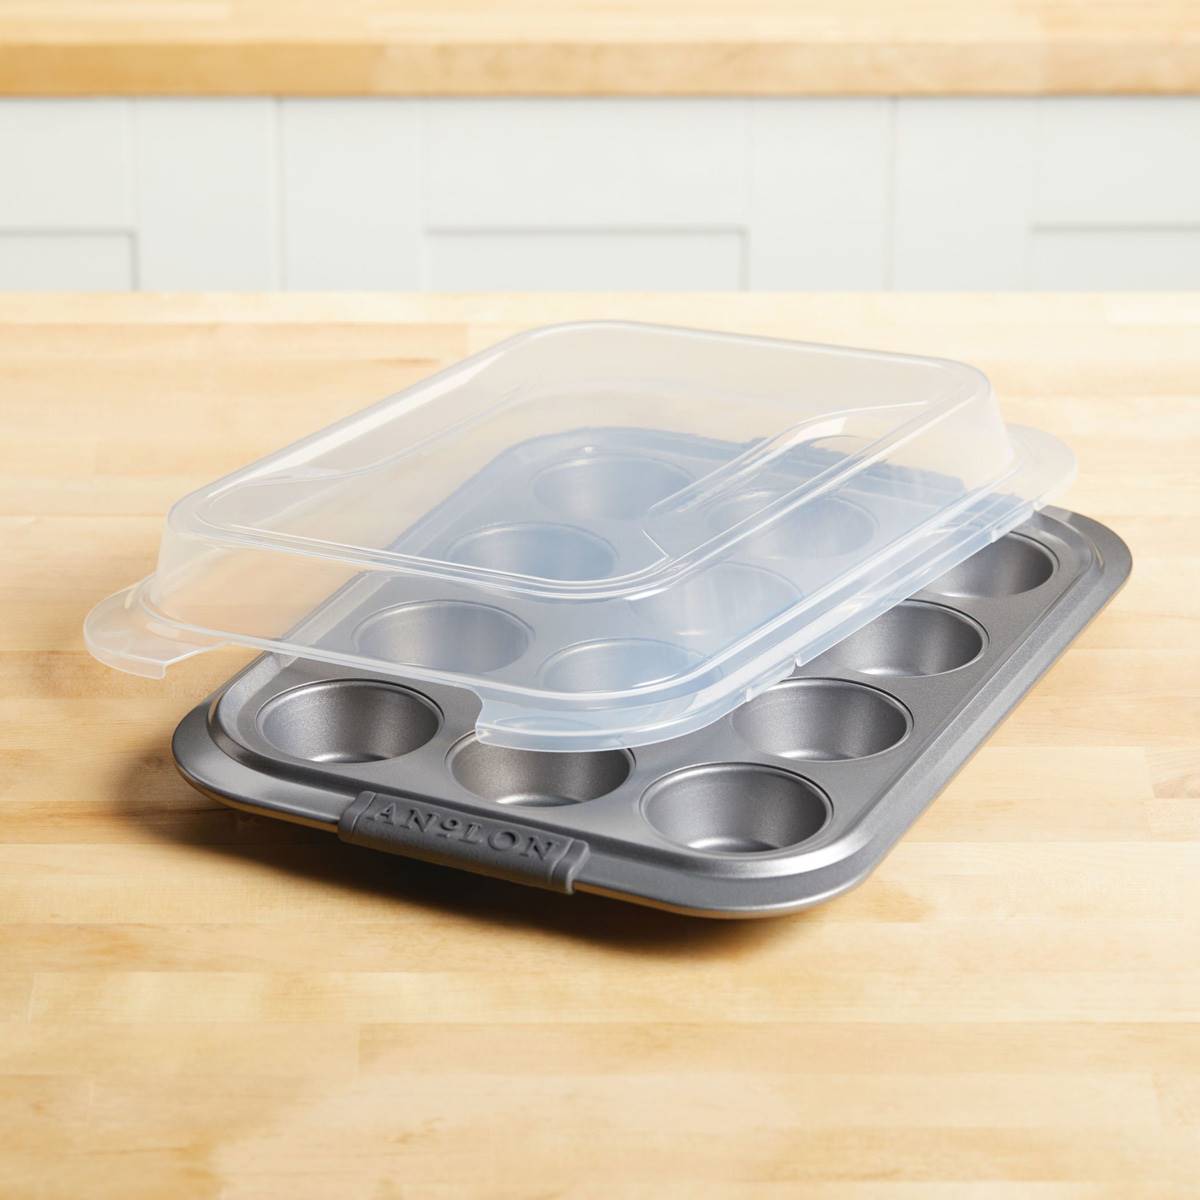 Anolon(R) Advanced Nonstick Bakeware Muffin Pan With Lid -12-Cup